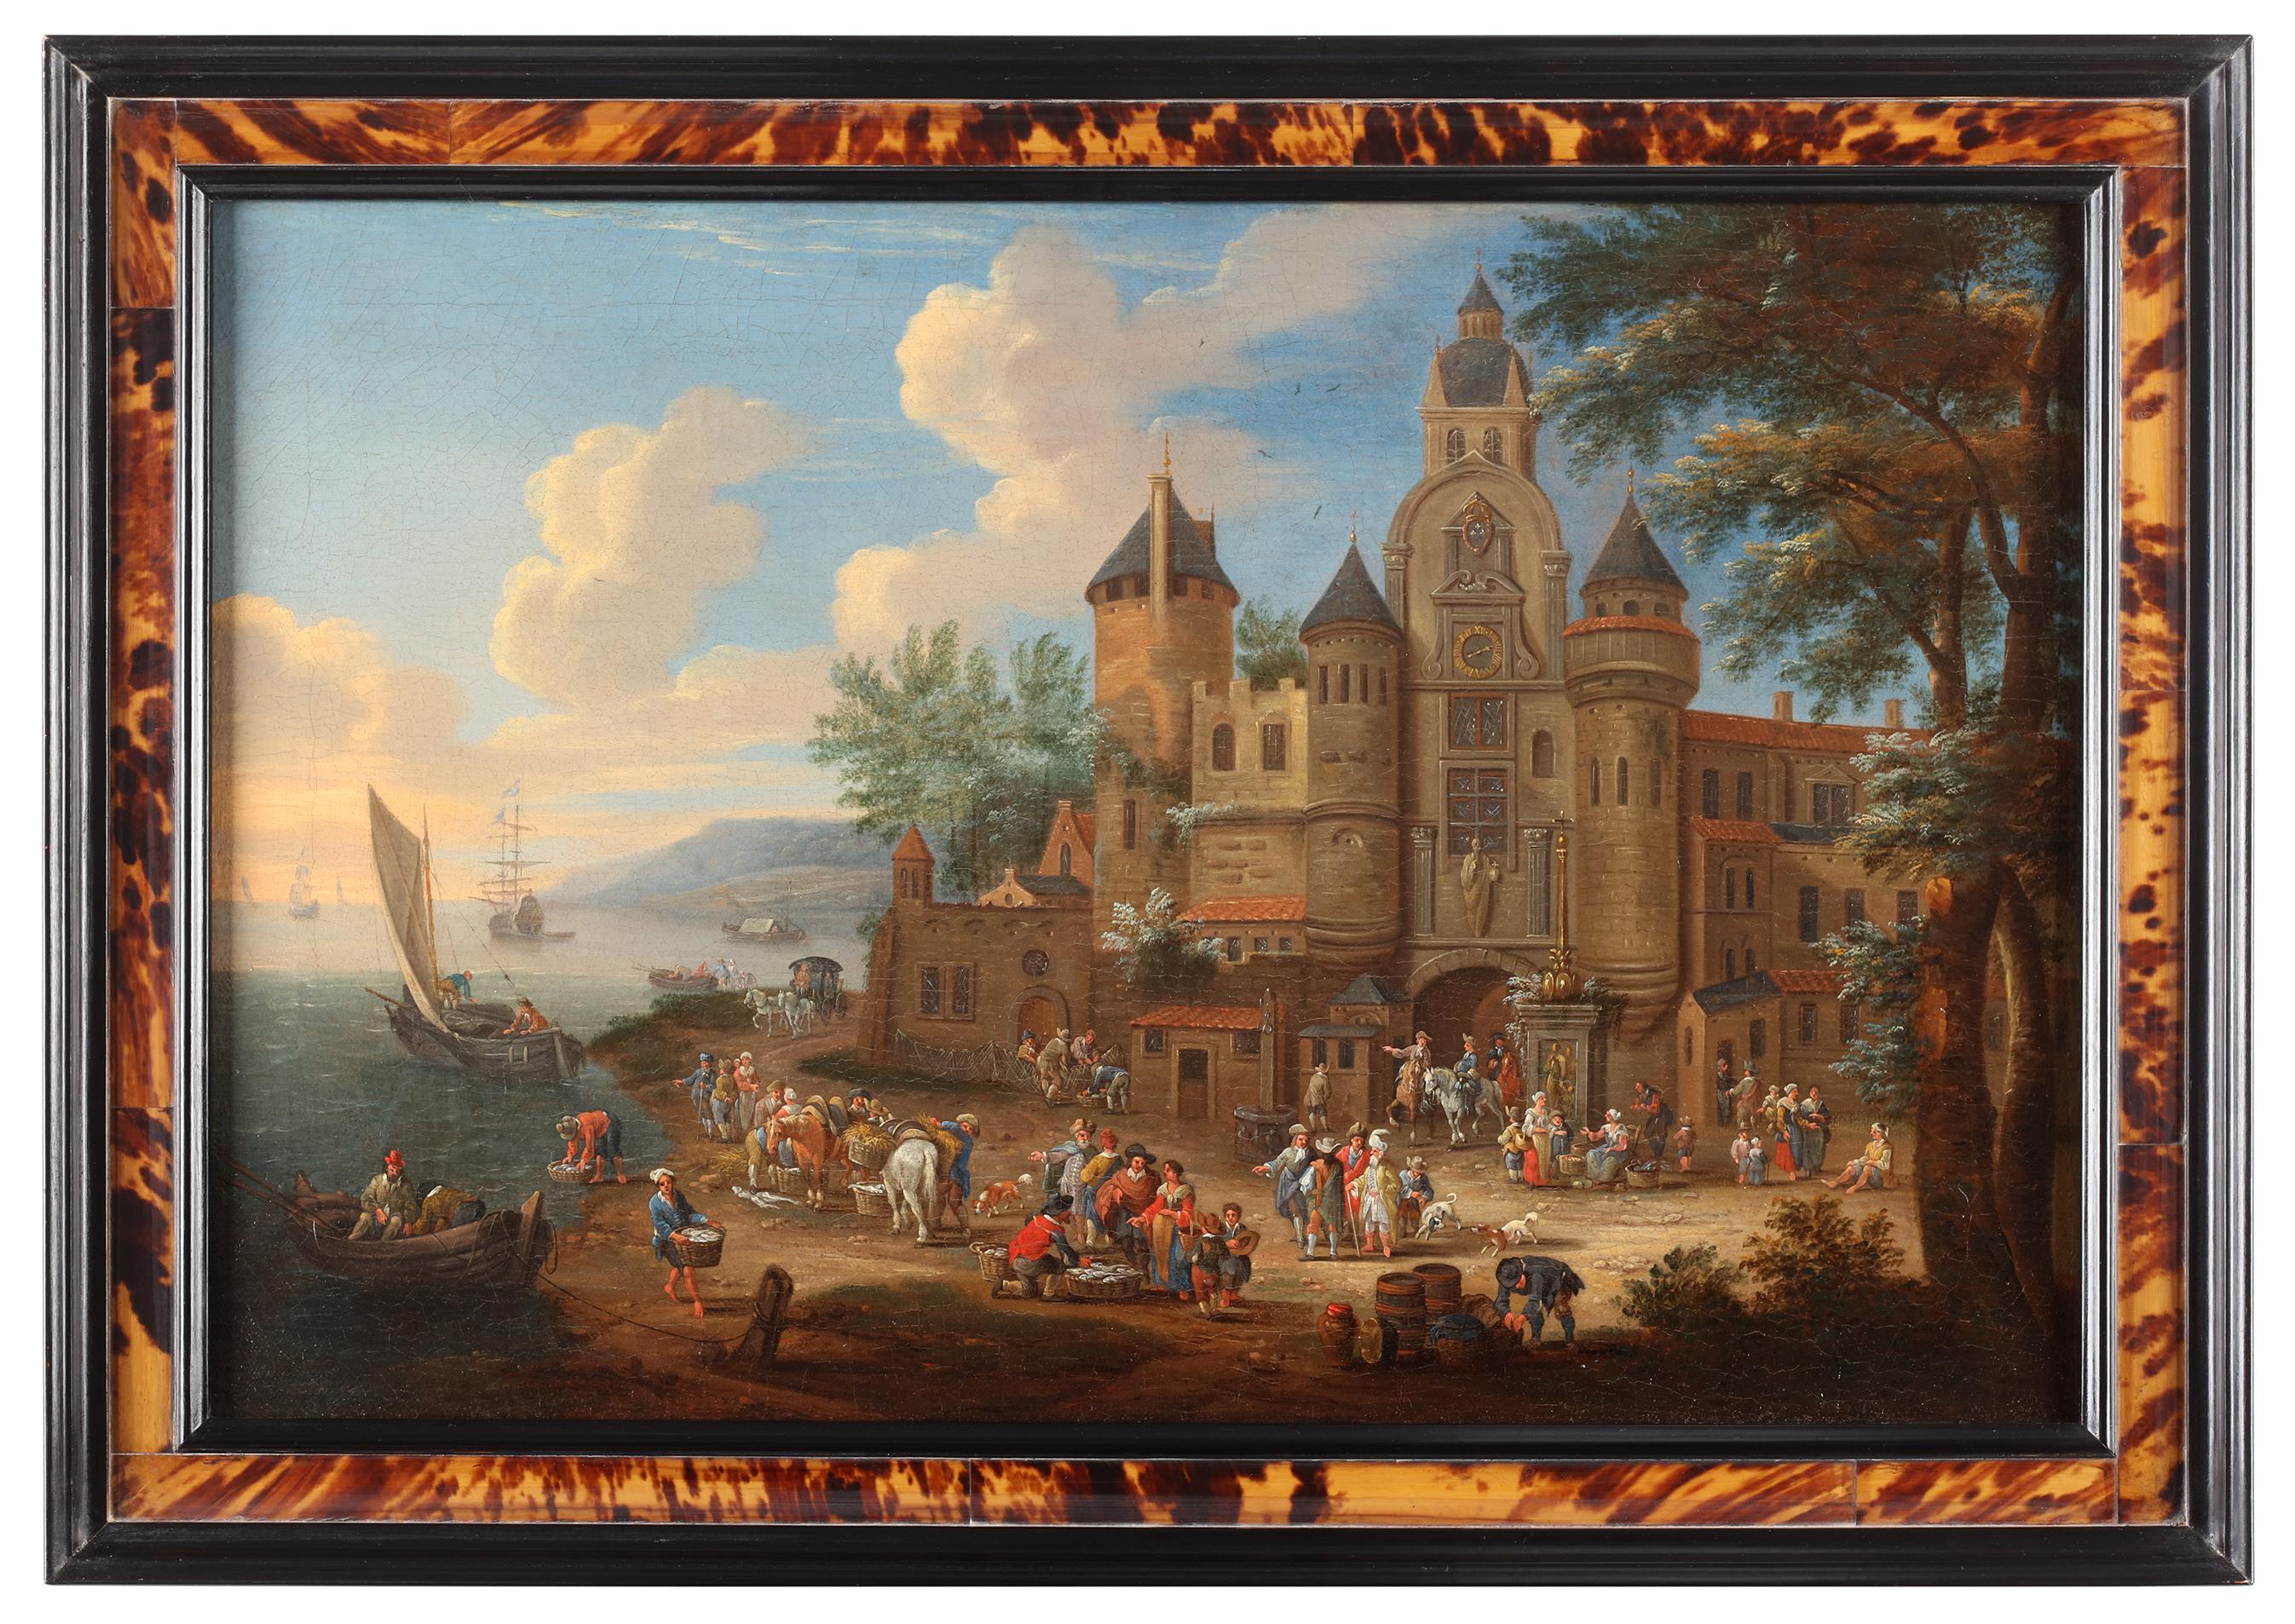 Two scenes showing a fish market in front of a town - Mathijs Schoevaerdts - Brown Landscape Painting by Matthijs Schoevaerdts